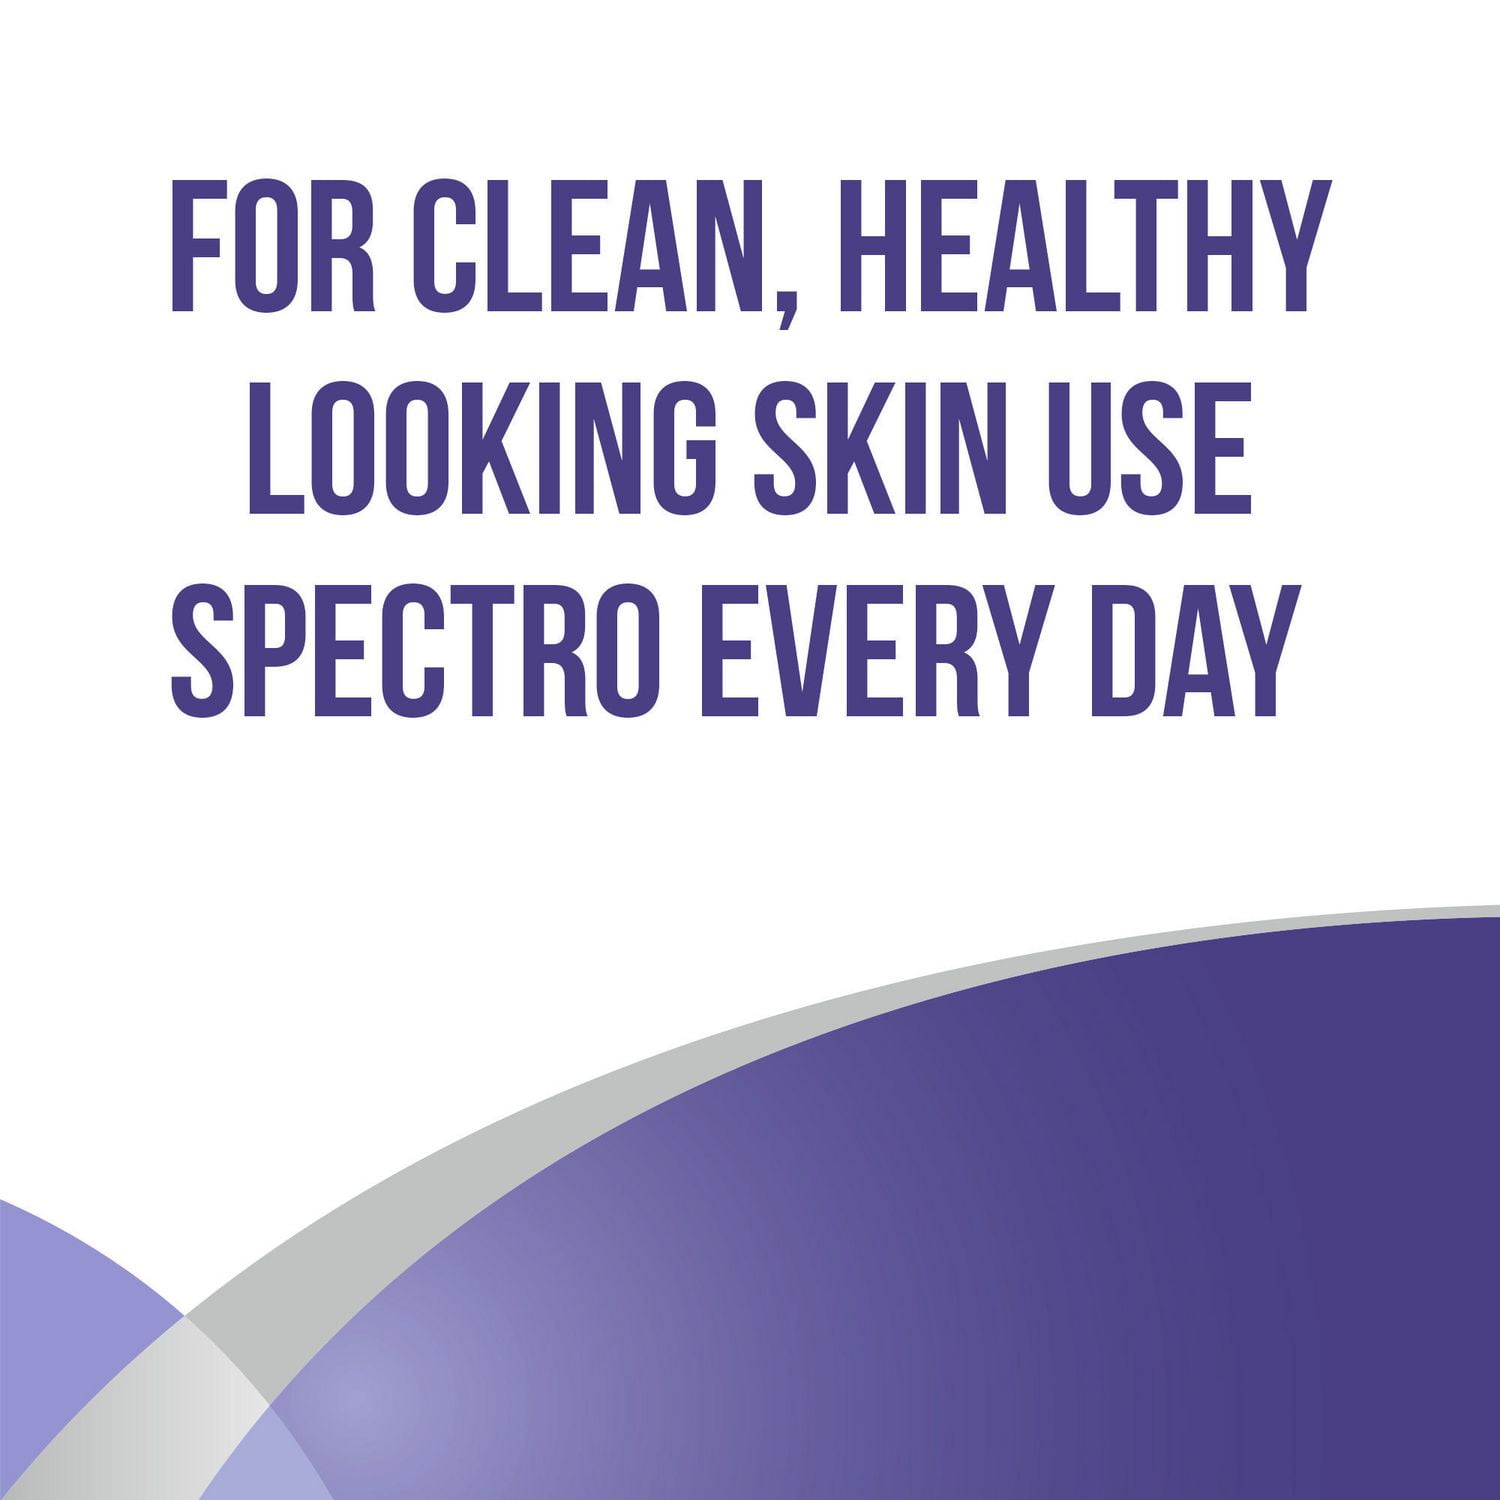  Spectro Jel CLEANSER for DRY Skin Fragrance Free 200 ml (6.75  fl oz) Pump : Beauty & Personal Care